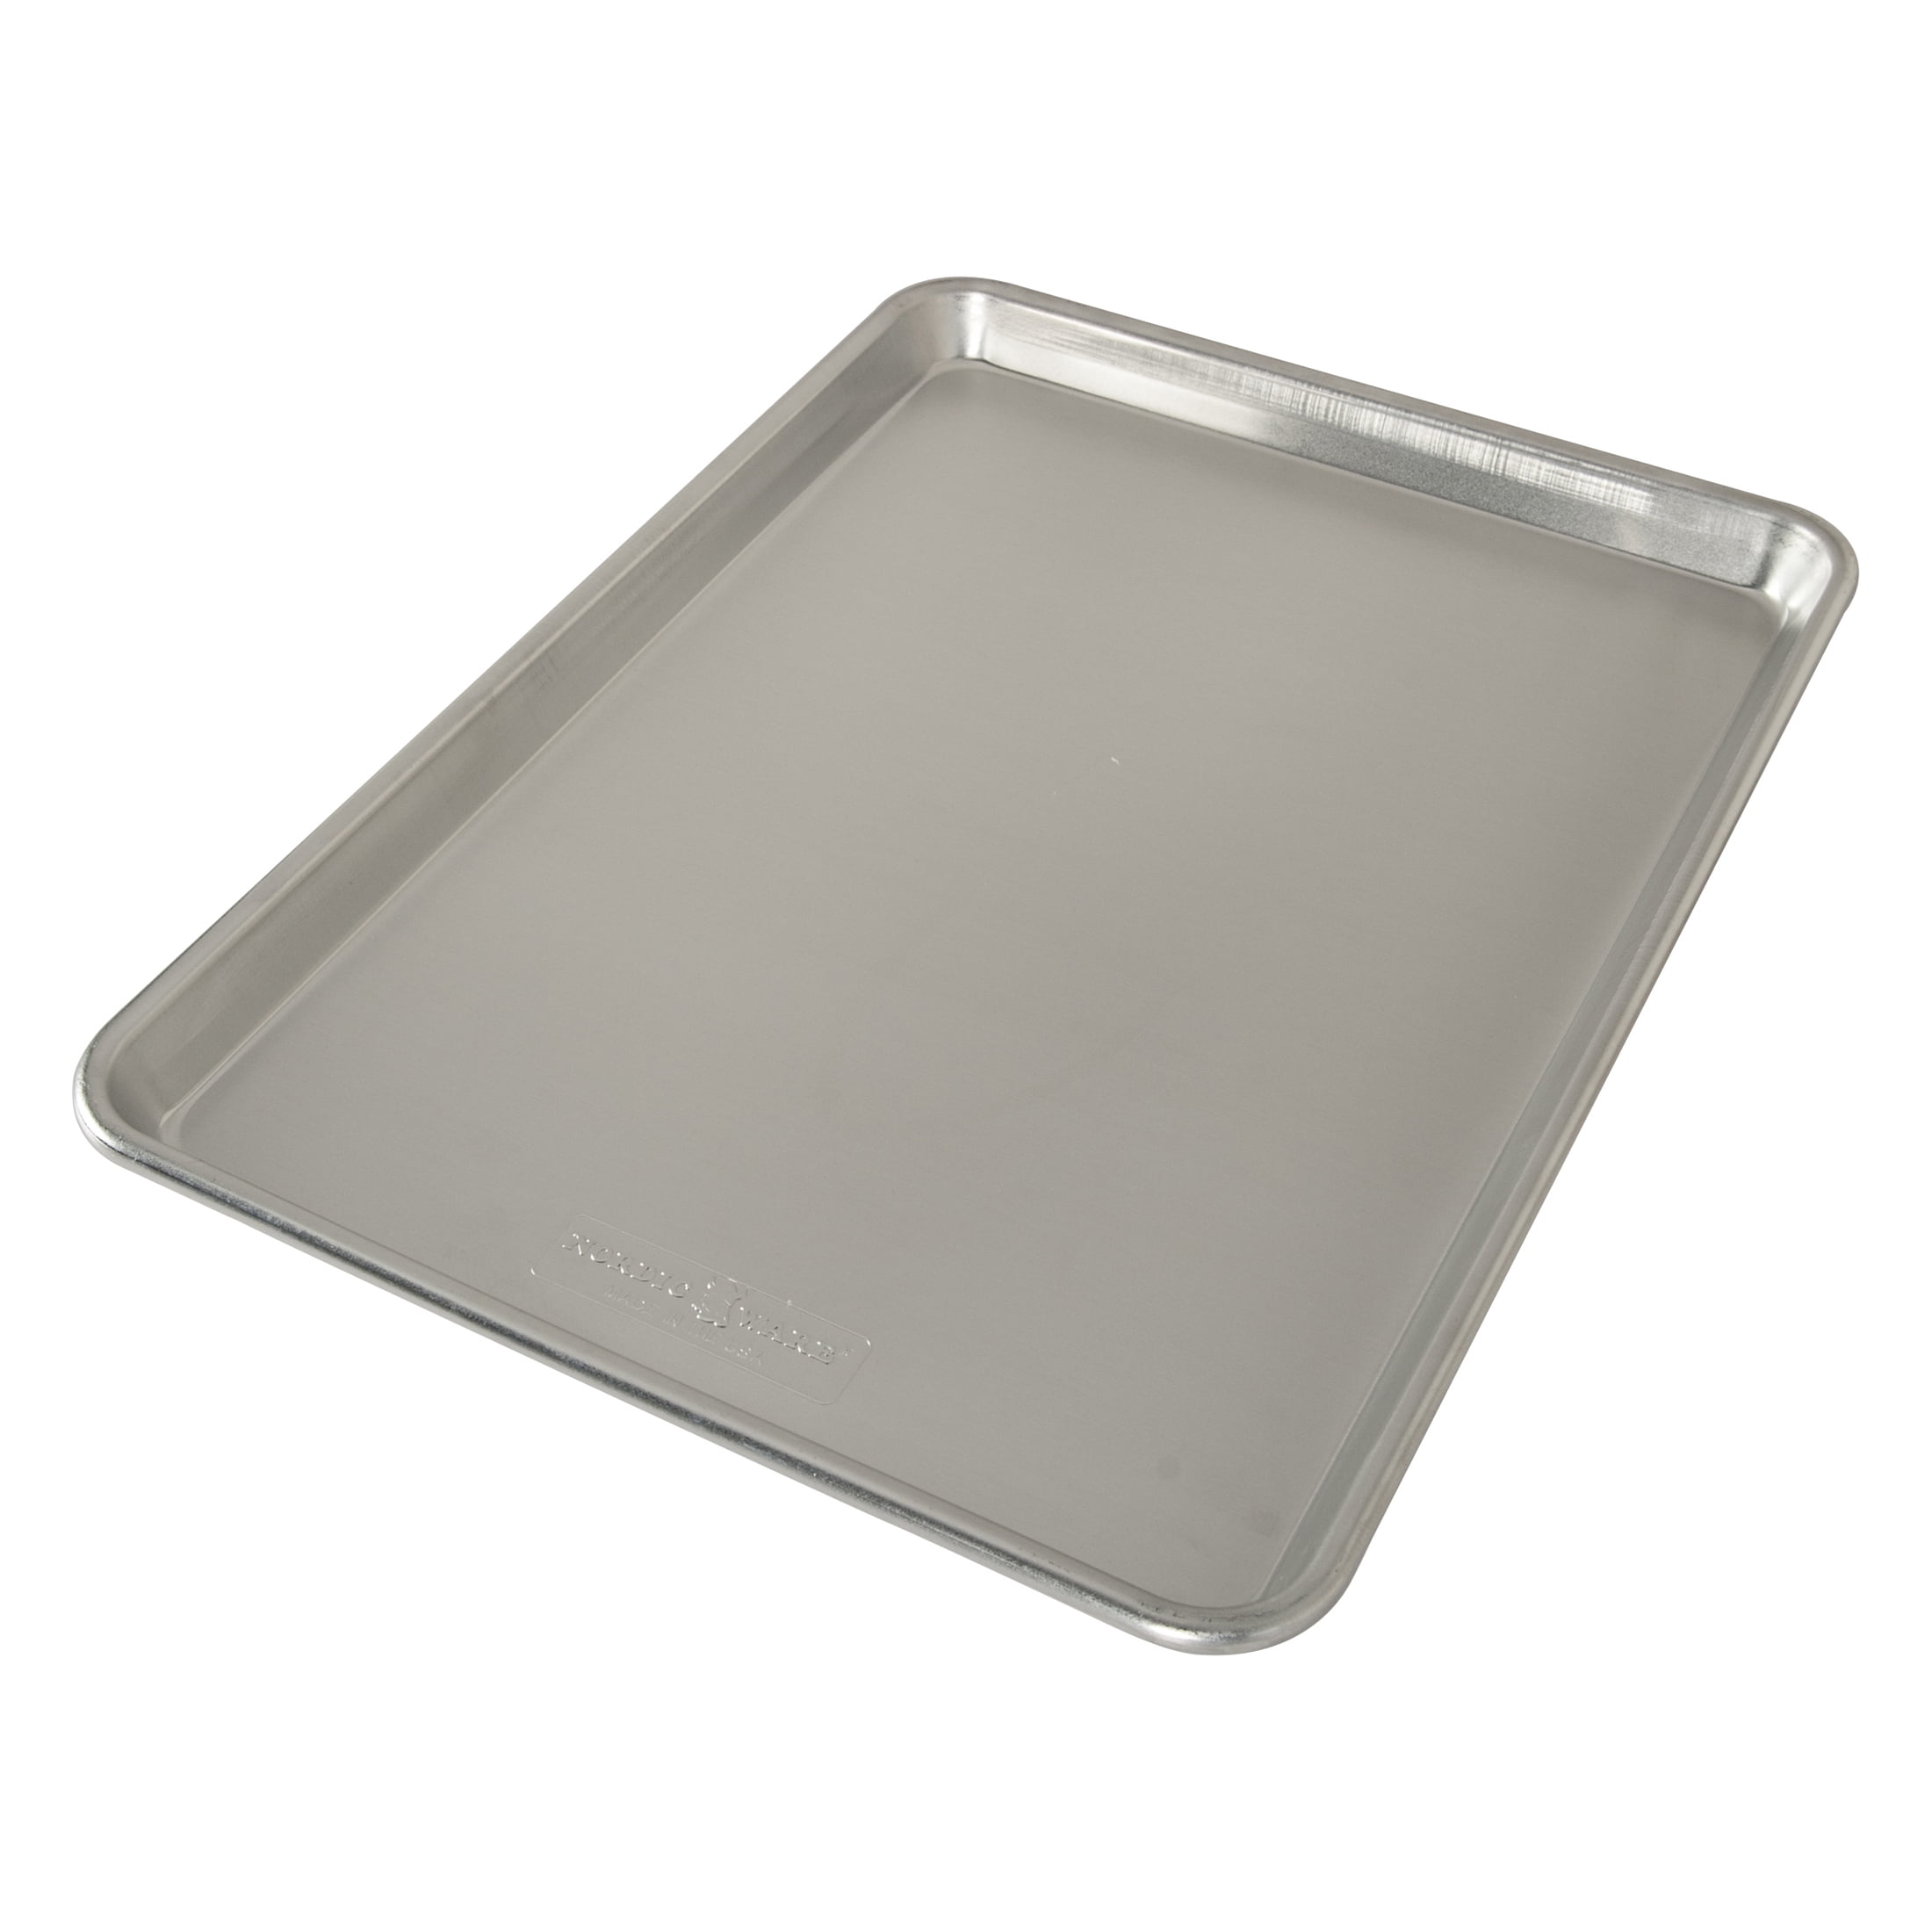  Nordic Ware - 43172AMZM Nordic Ware Half Sheet with Oven Safe  Nonstick Grid, 2 Piece Set, Natural & Naturals® Quarter Sheet with  Oven-Safe Nonstick Grid: Home & Kitchen